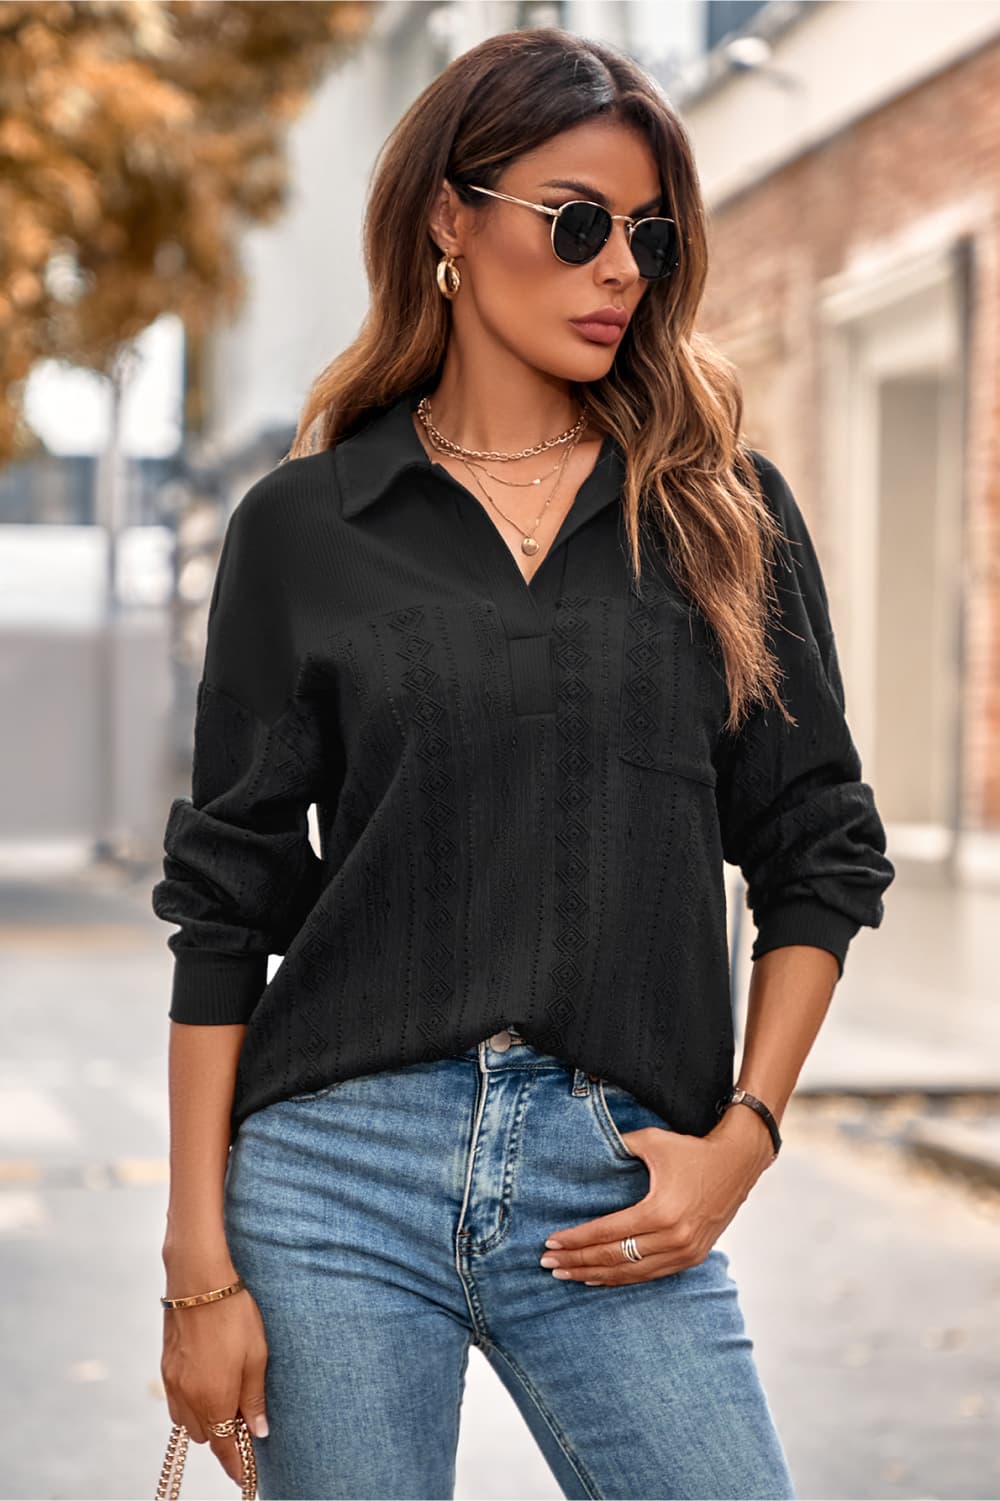 Johnny Collar Long Sleeve Blouse BLUE ZONE PLANET